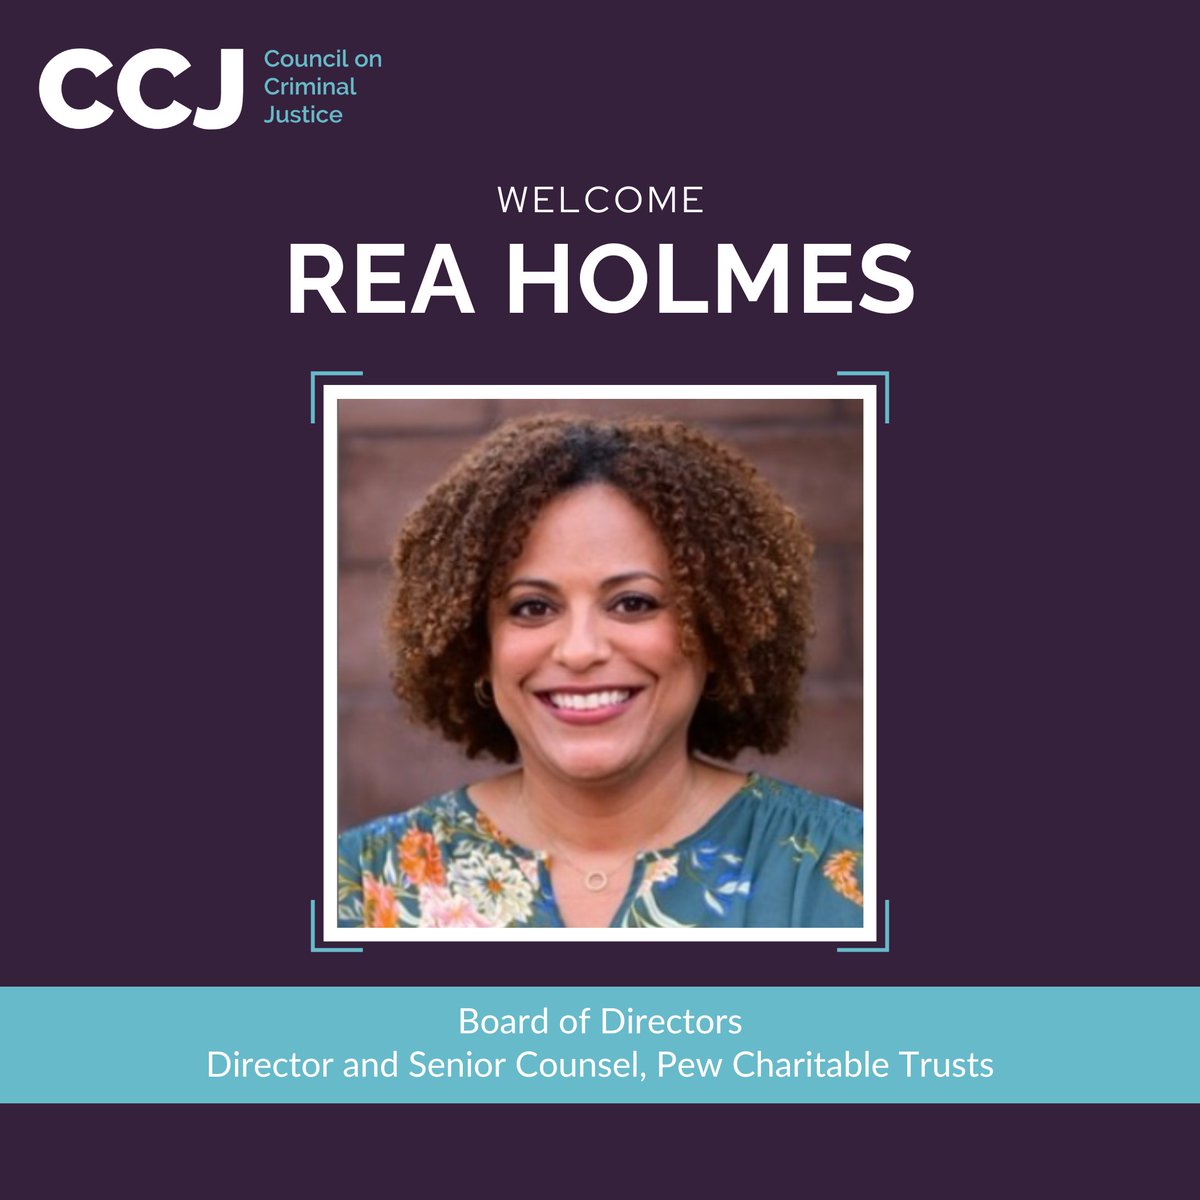 We are honored to welcome Rea Holmes, Director and Senior Counsel at Pew Charitable Trusts (@pewtrusts), to CCJ’s Board of Directors!